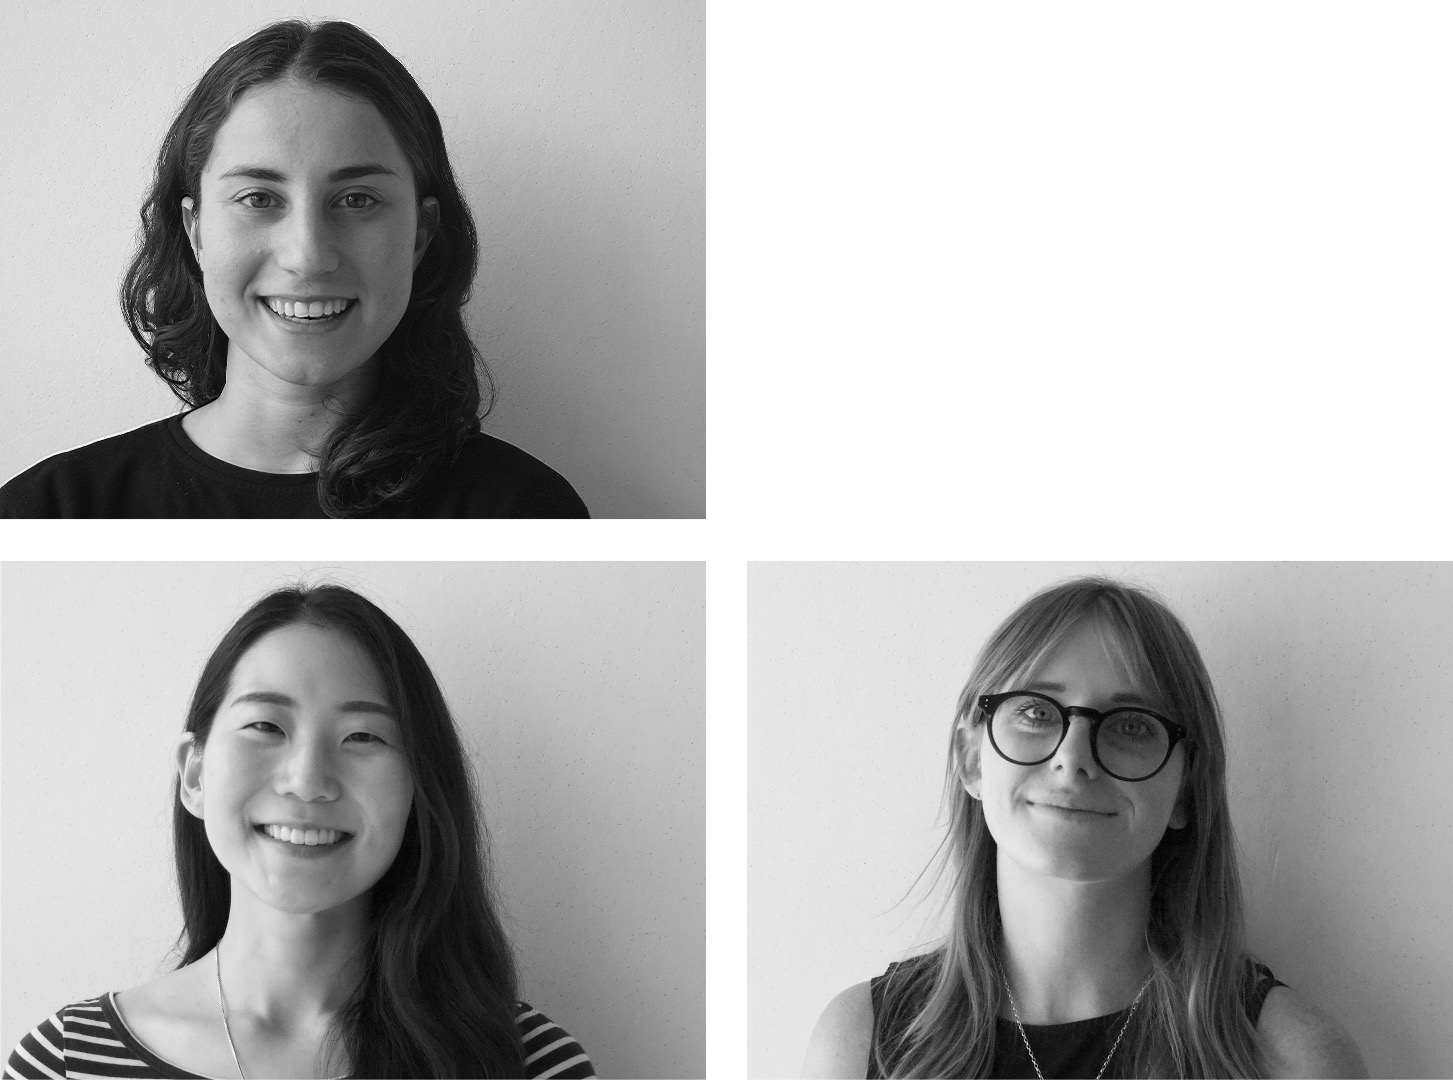 Sarah Bookman (top left), Sophia Kim (bottom left), and Victoria Wright (right) are now Registered Architects with the New Zealand Registered Architects Board.